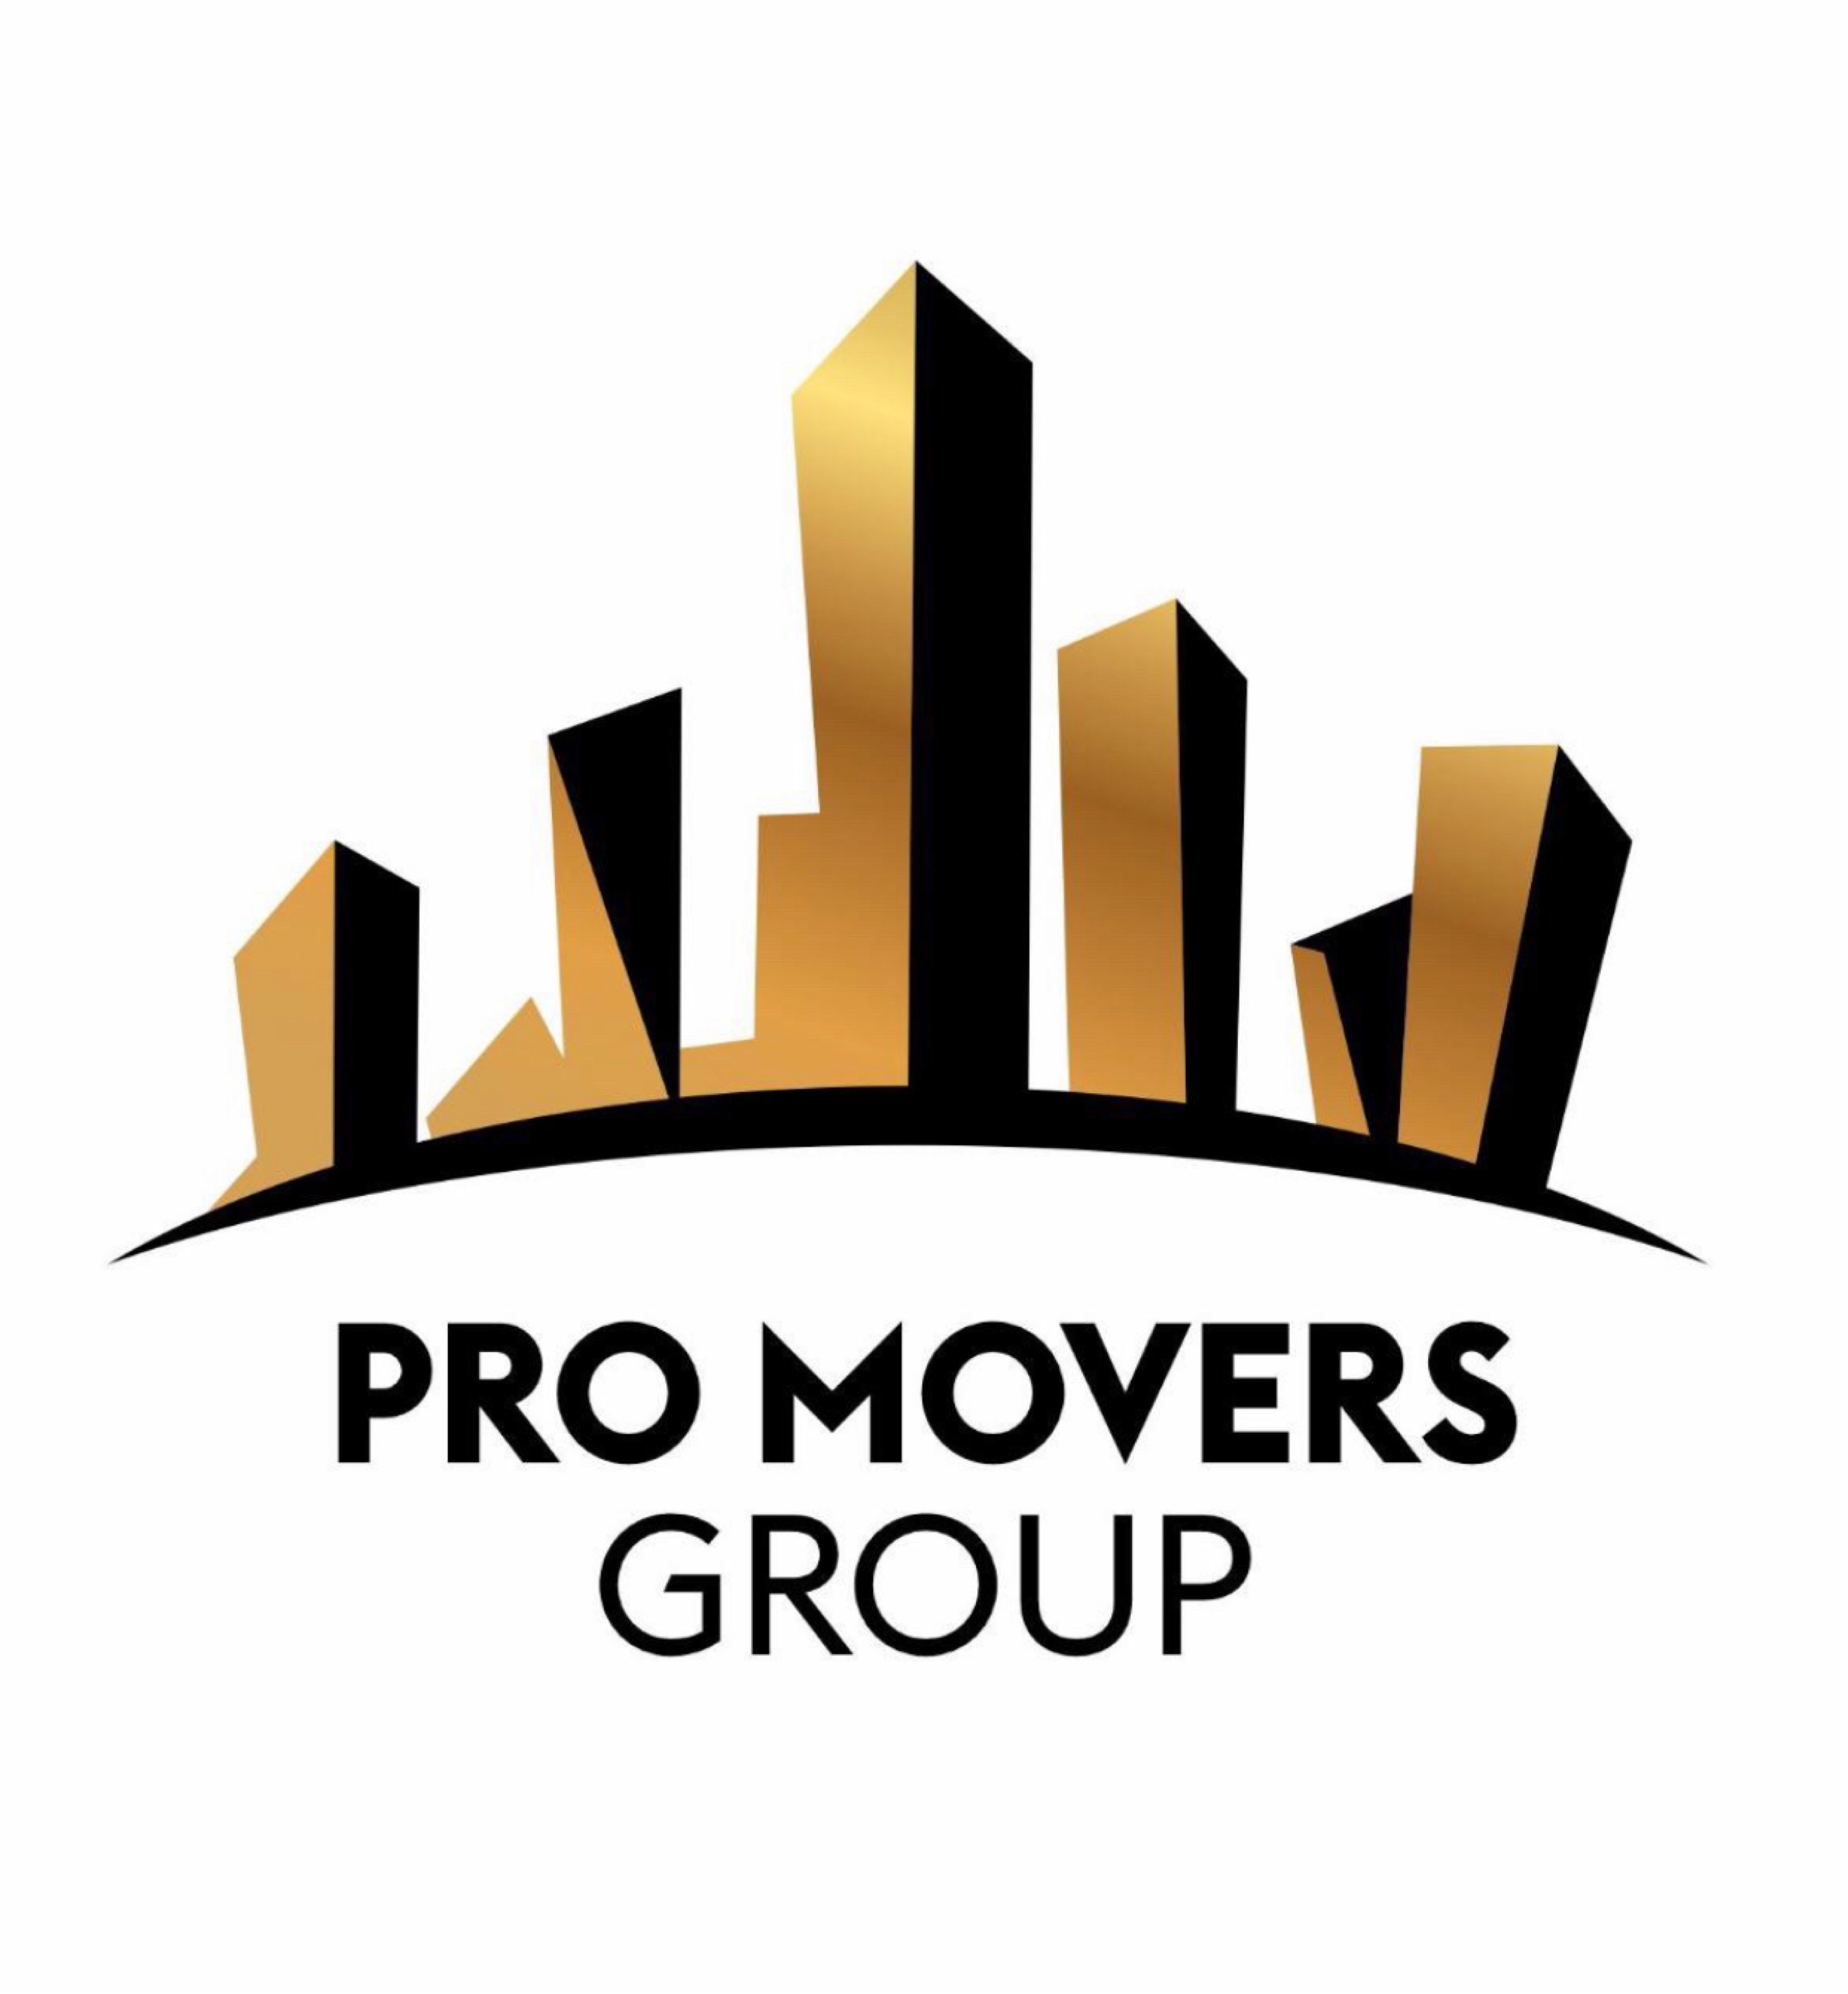 Professional Movers Group Logo